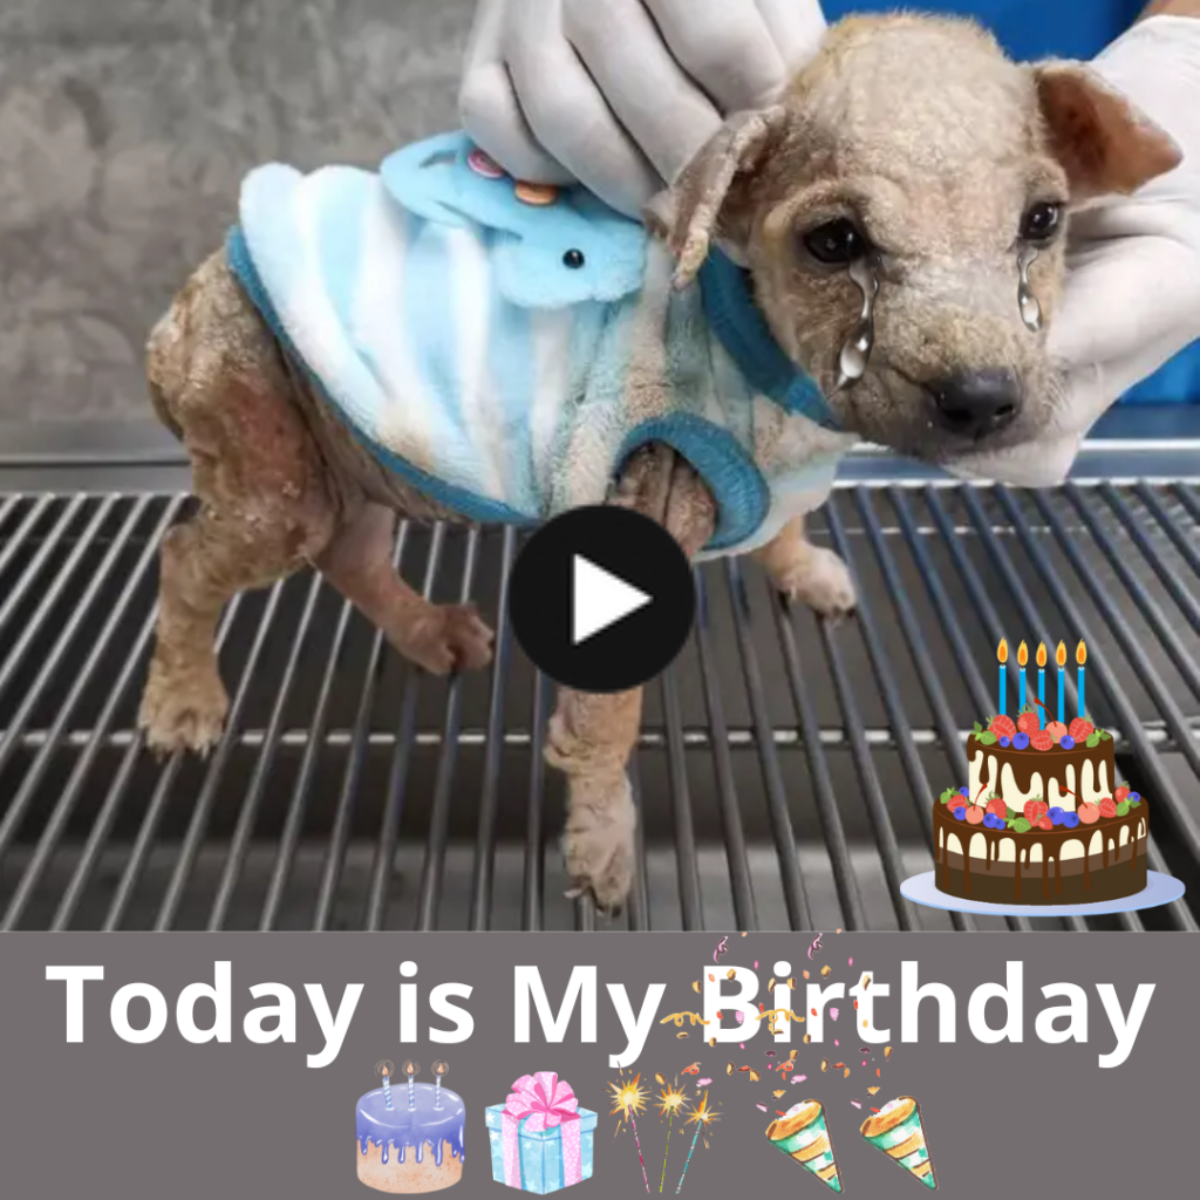 poor weak and malnourished puppy’s first birthday. No one cares about him, he is very sad. Please send congratulations to comfort the poor puppy.